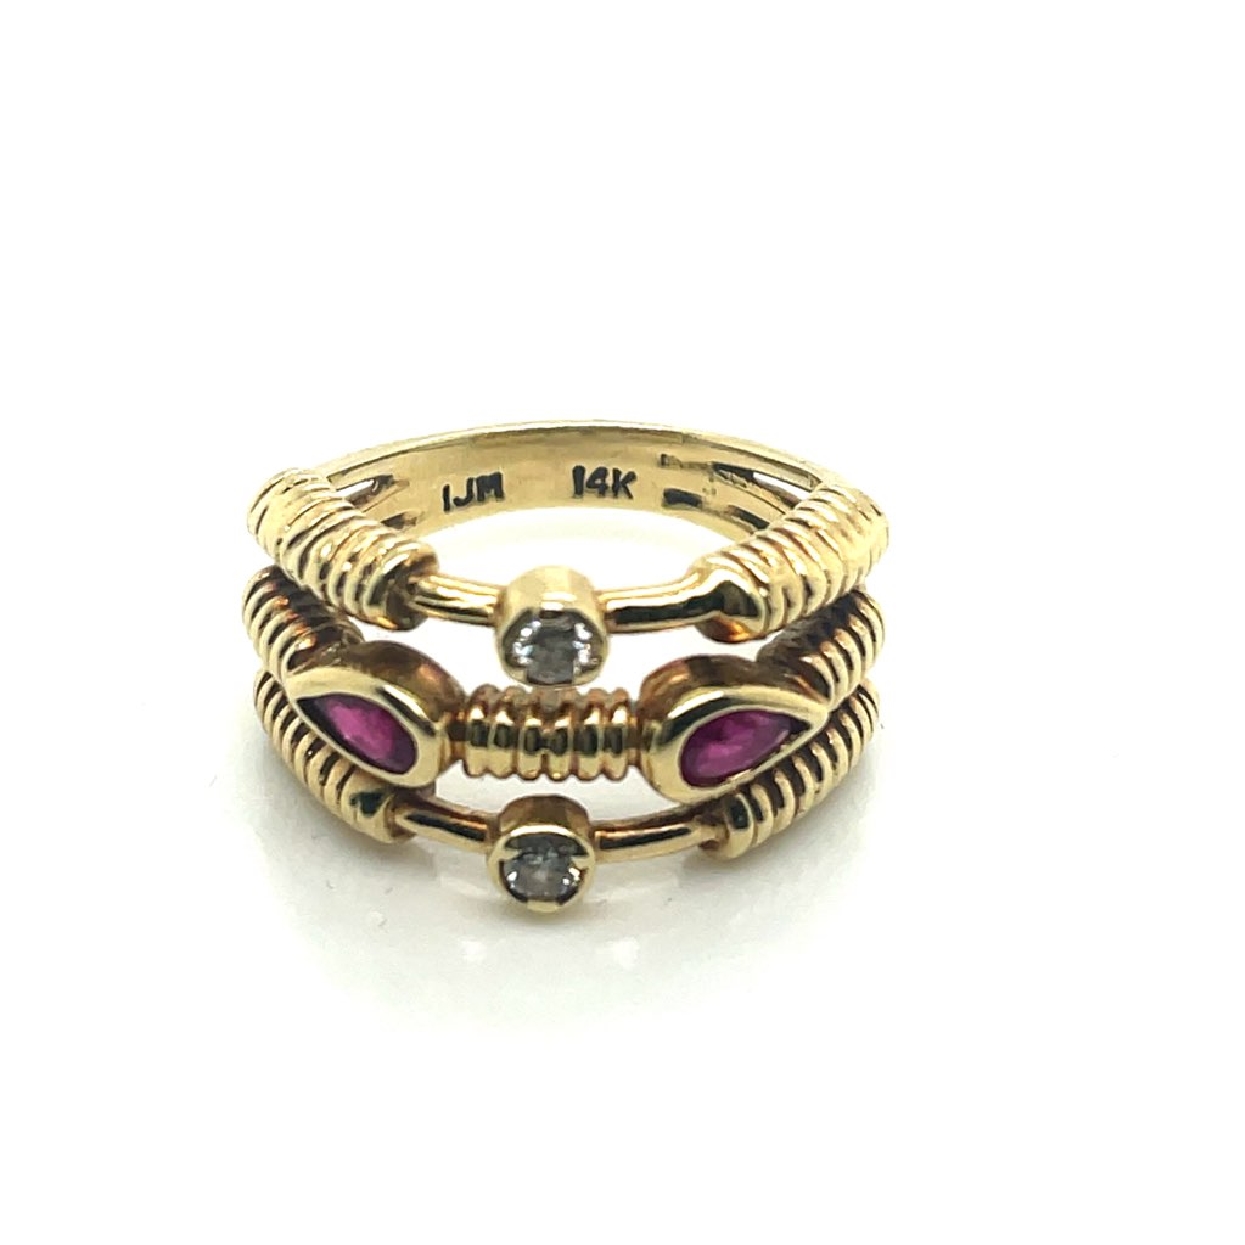 14K Yellow Gold Ring with Pear Shaped Rubies; Diamonds; and Coil Design Size 6.5